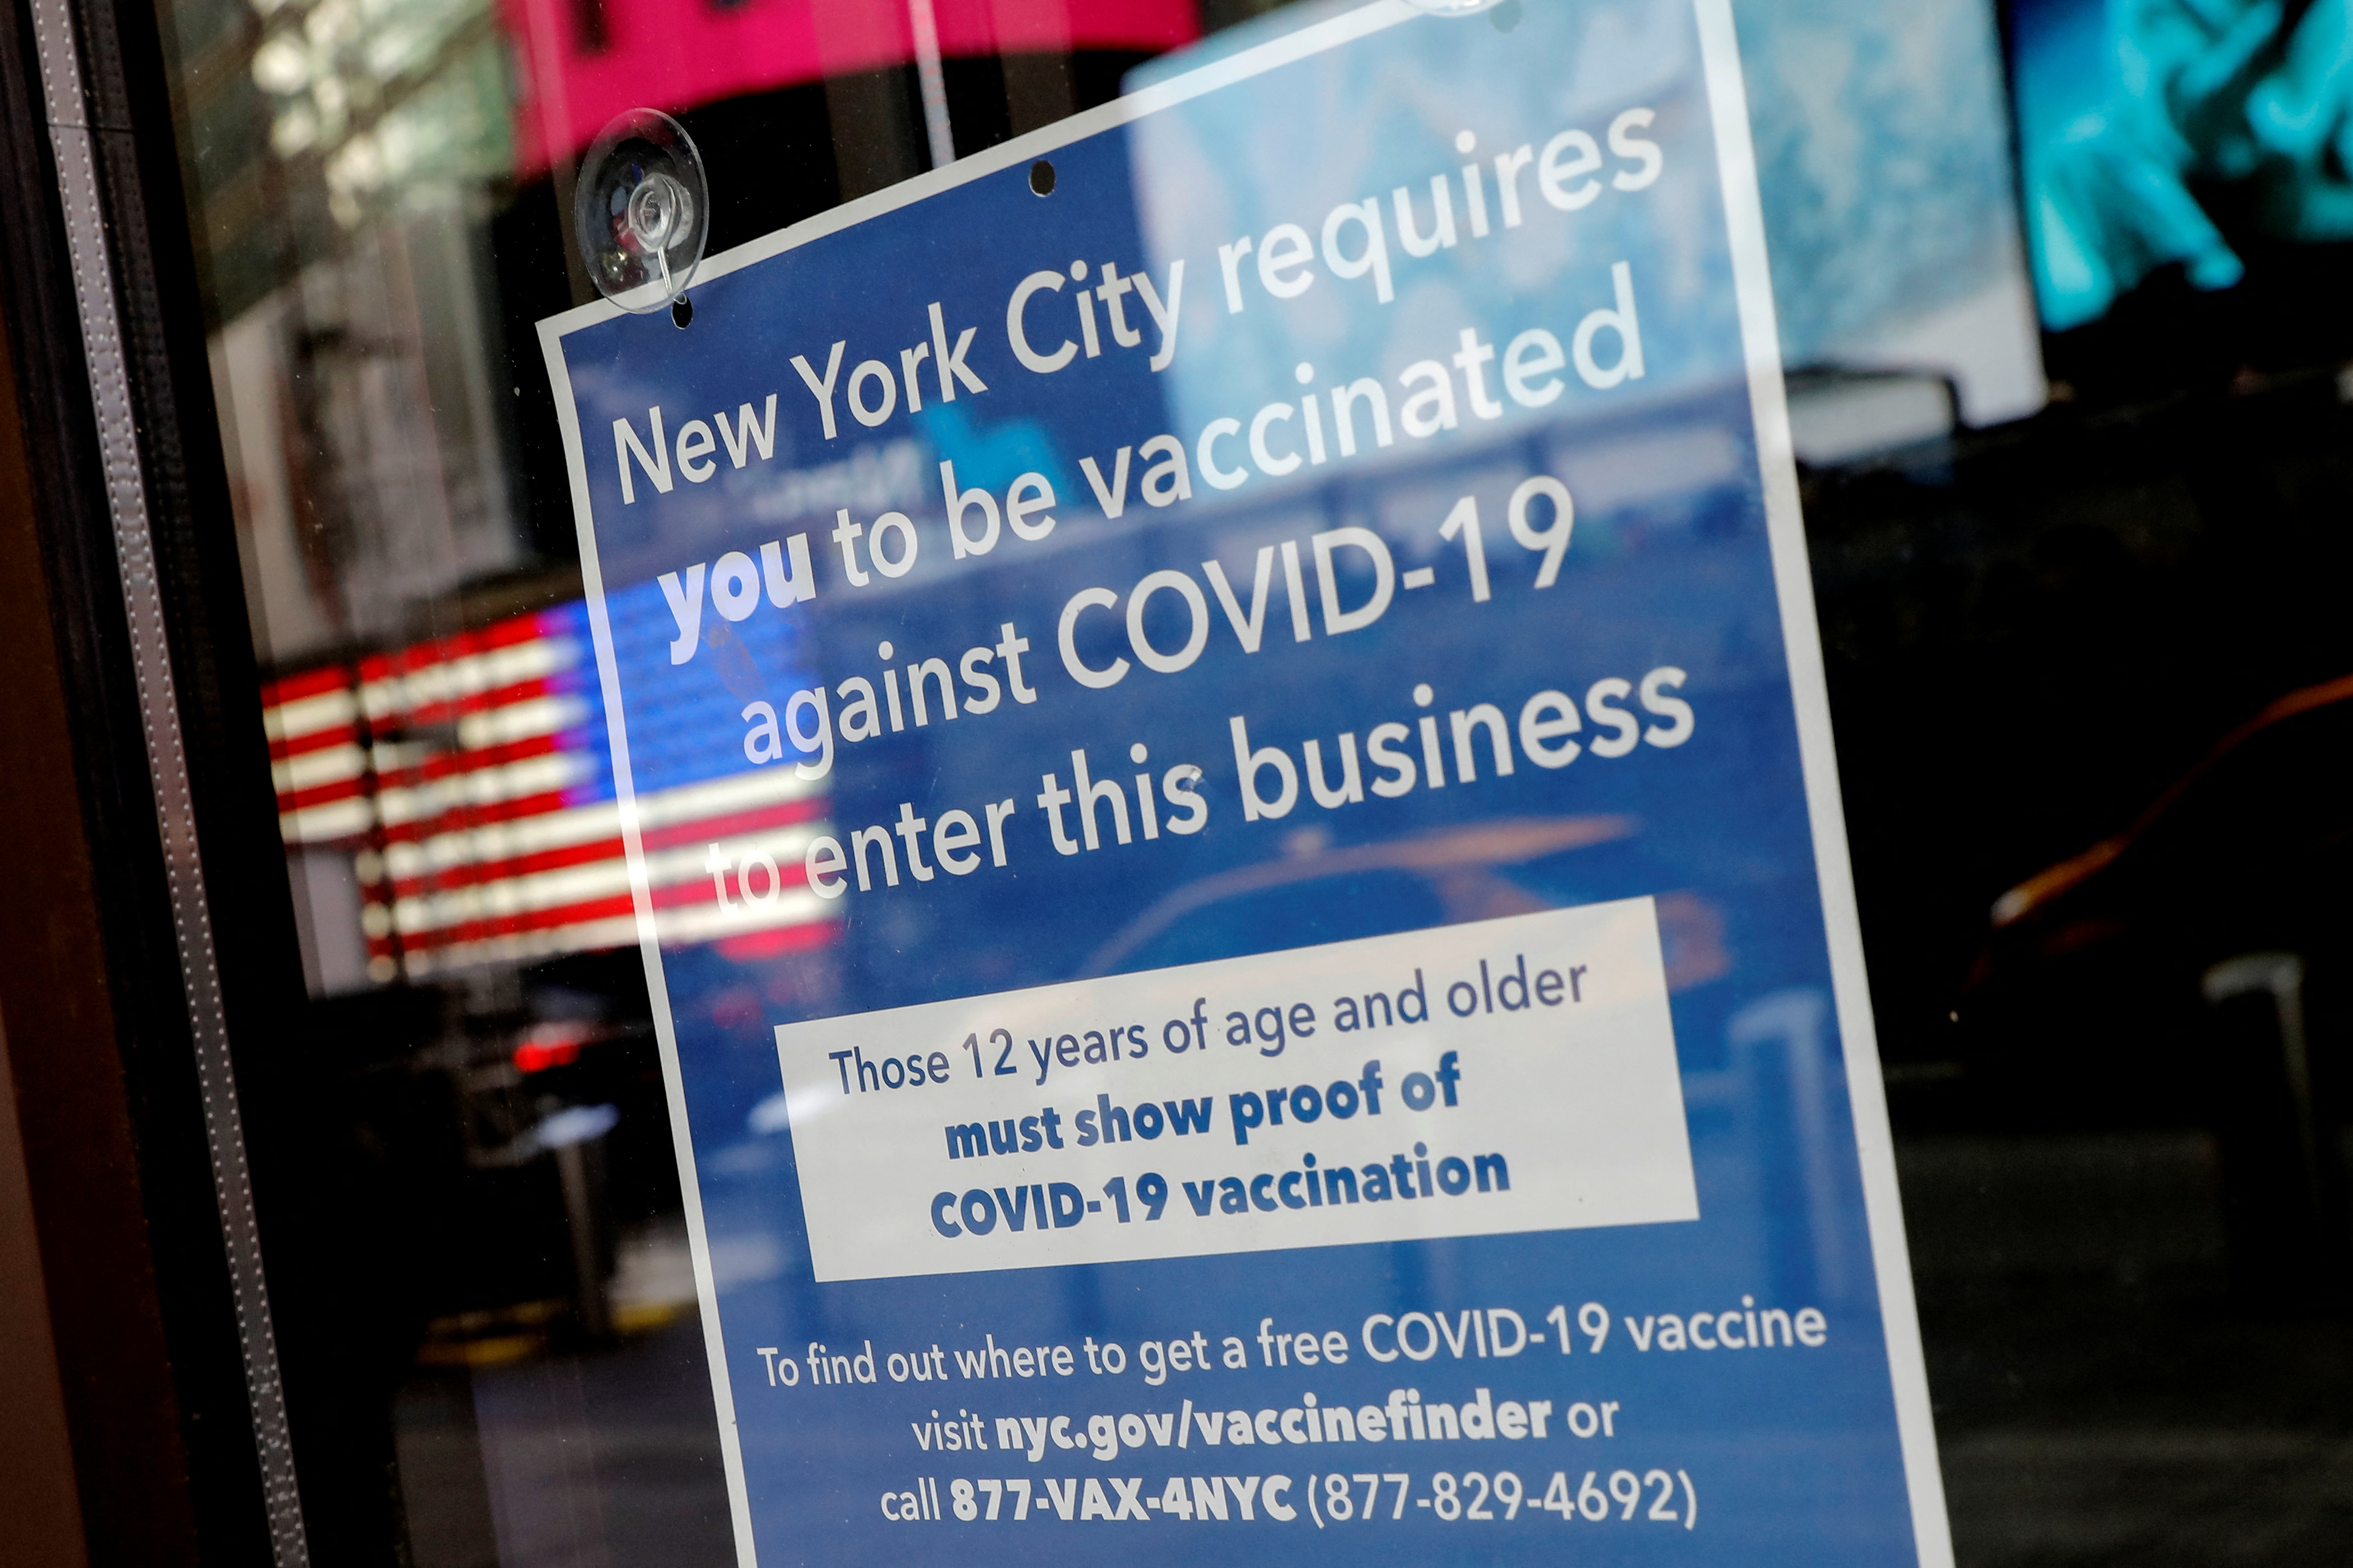 A sign is pictured on the door of a restaurant requiring patrons to be vaccinated against COVID-19 in Times Square in Manhattan New York City, New York, U.S., December 7, 2021. REUTERS/Mike Segar